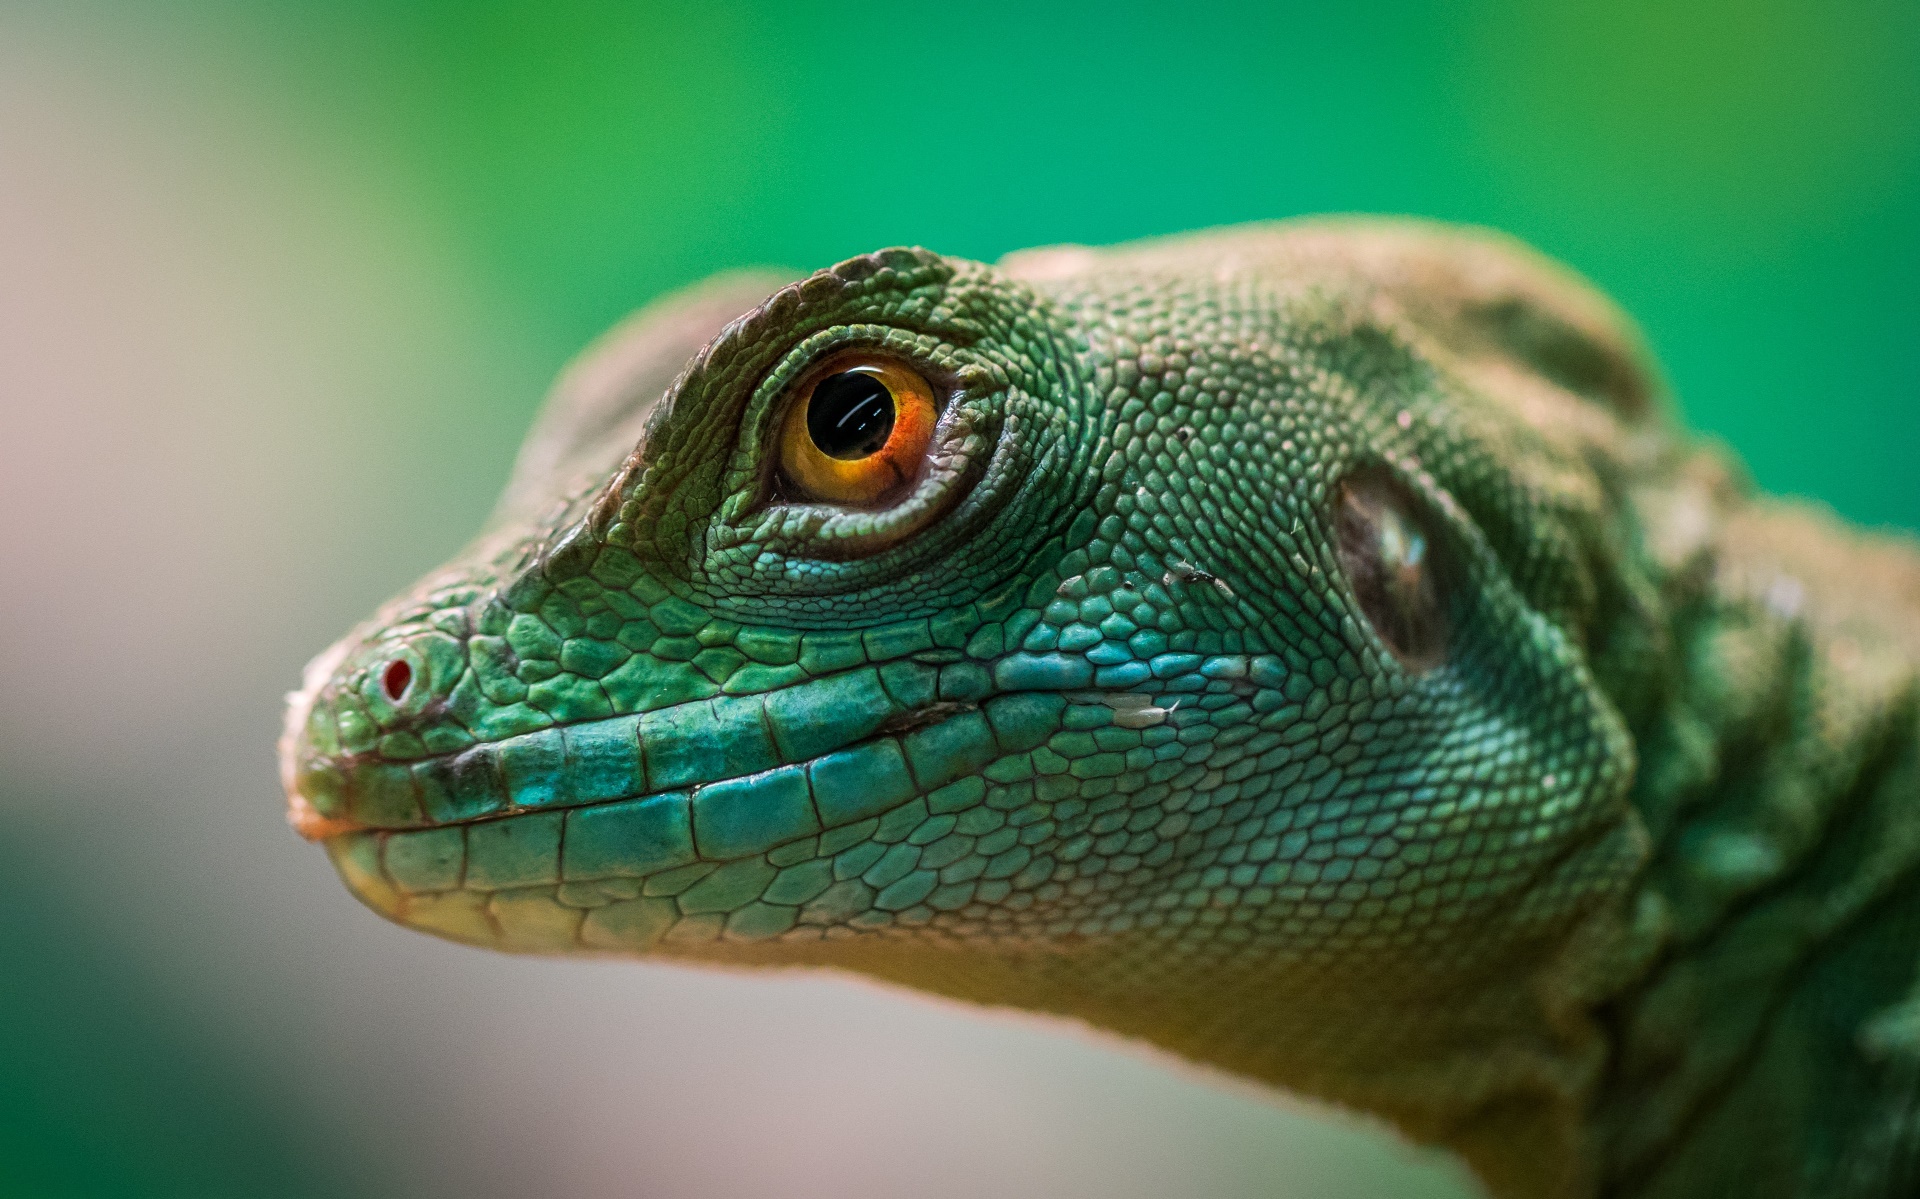 General 1920x1199 green background reptiles animals green